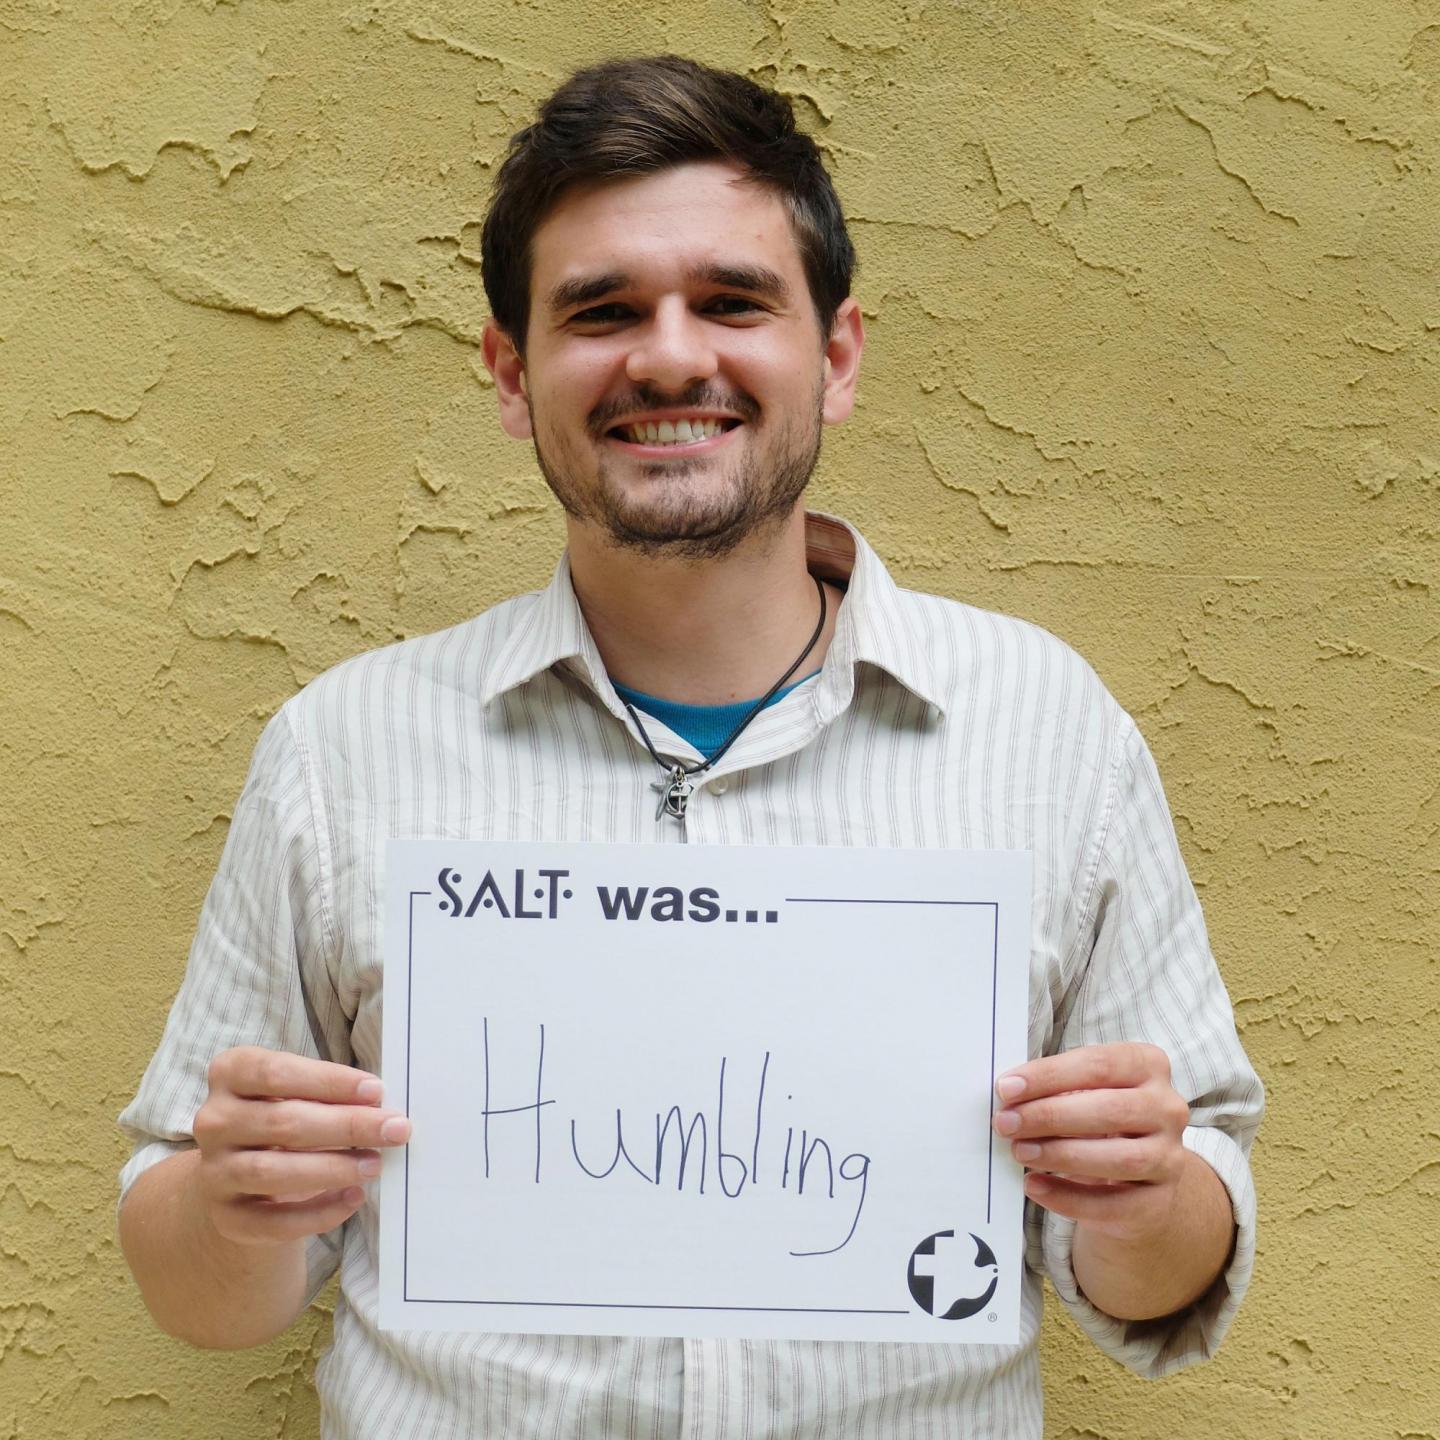 A young adult stands in front of a yellow wall and holds a sign that says, "SALT was humbling"